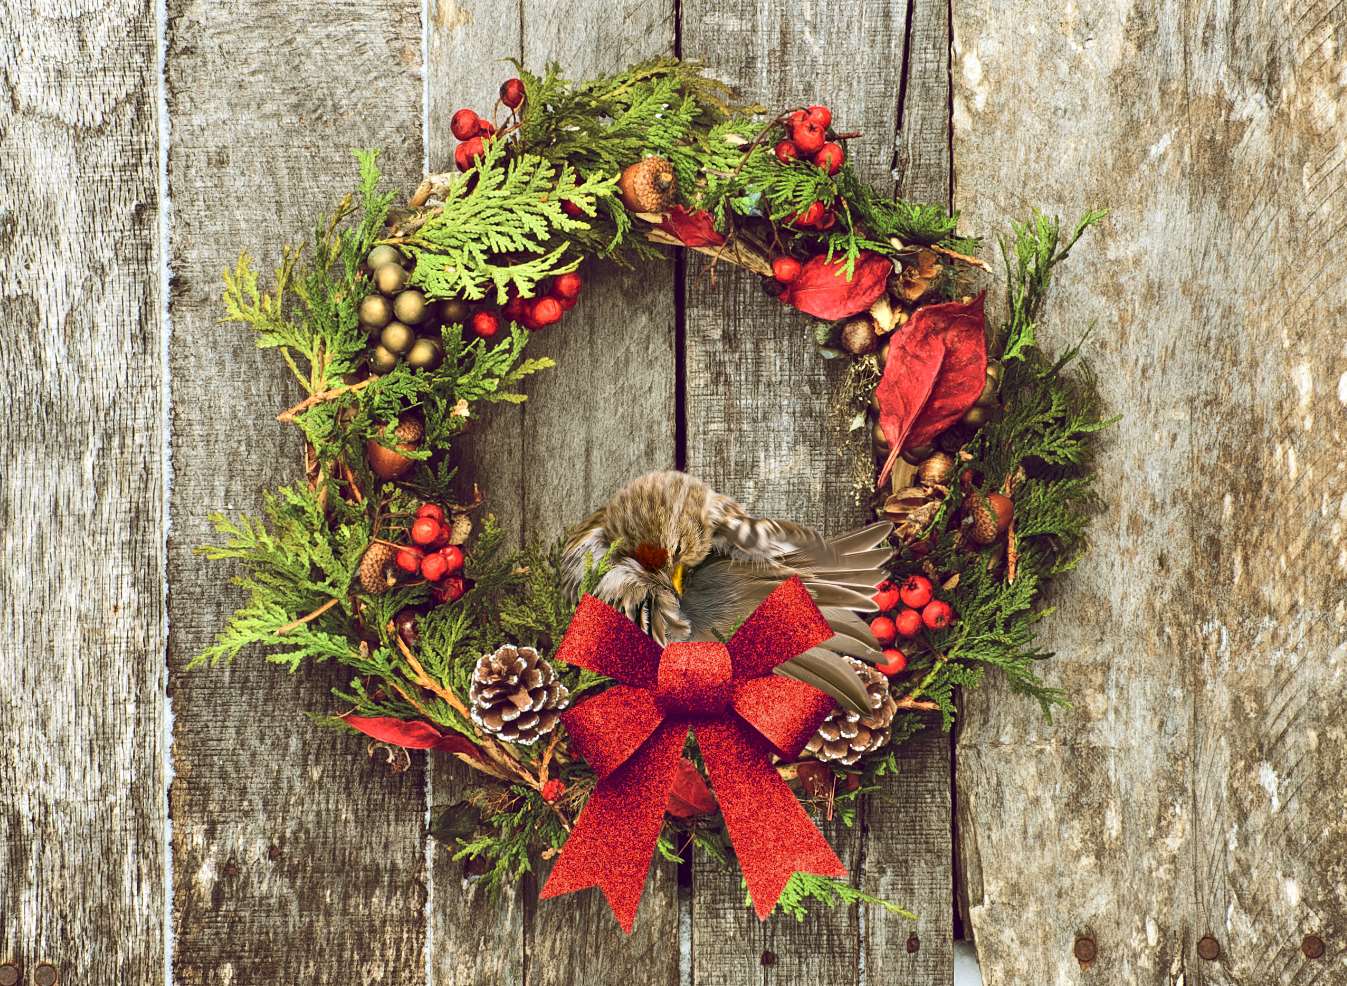 A Christmas wreath - the perfect finishing touch for your home